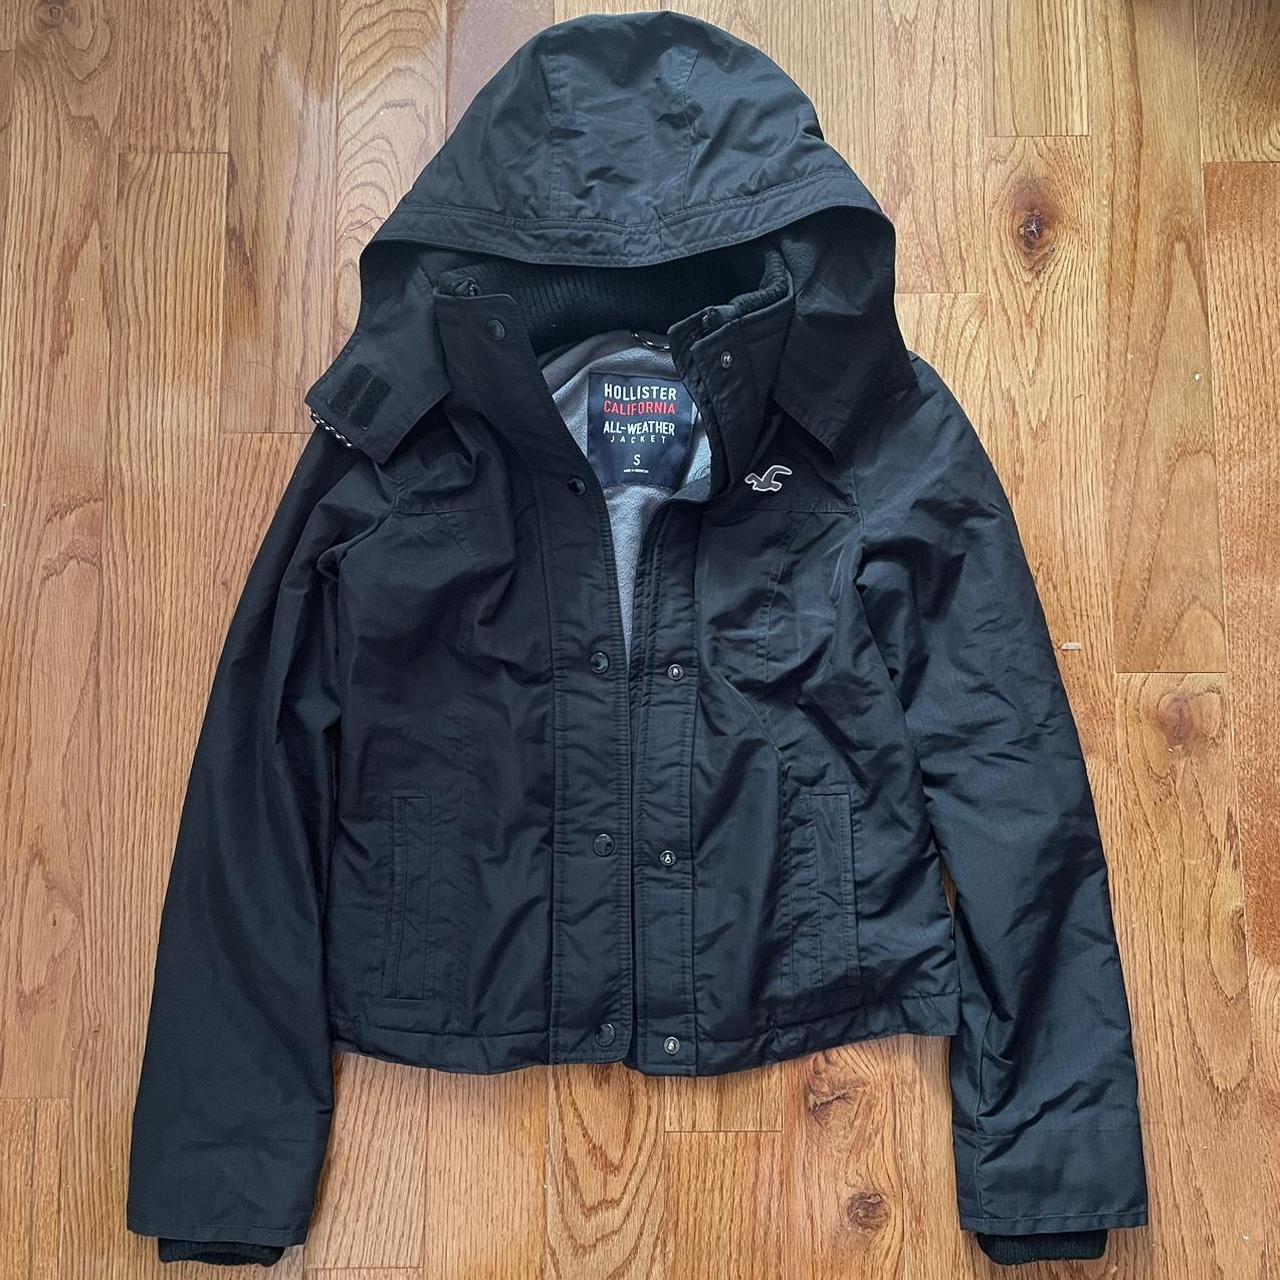 Hollister All Weather Collection Mens Black Winter Jacket size XS